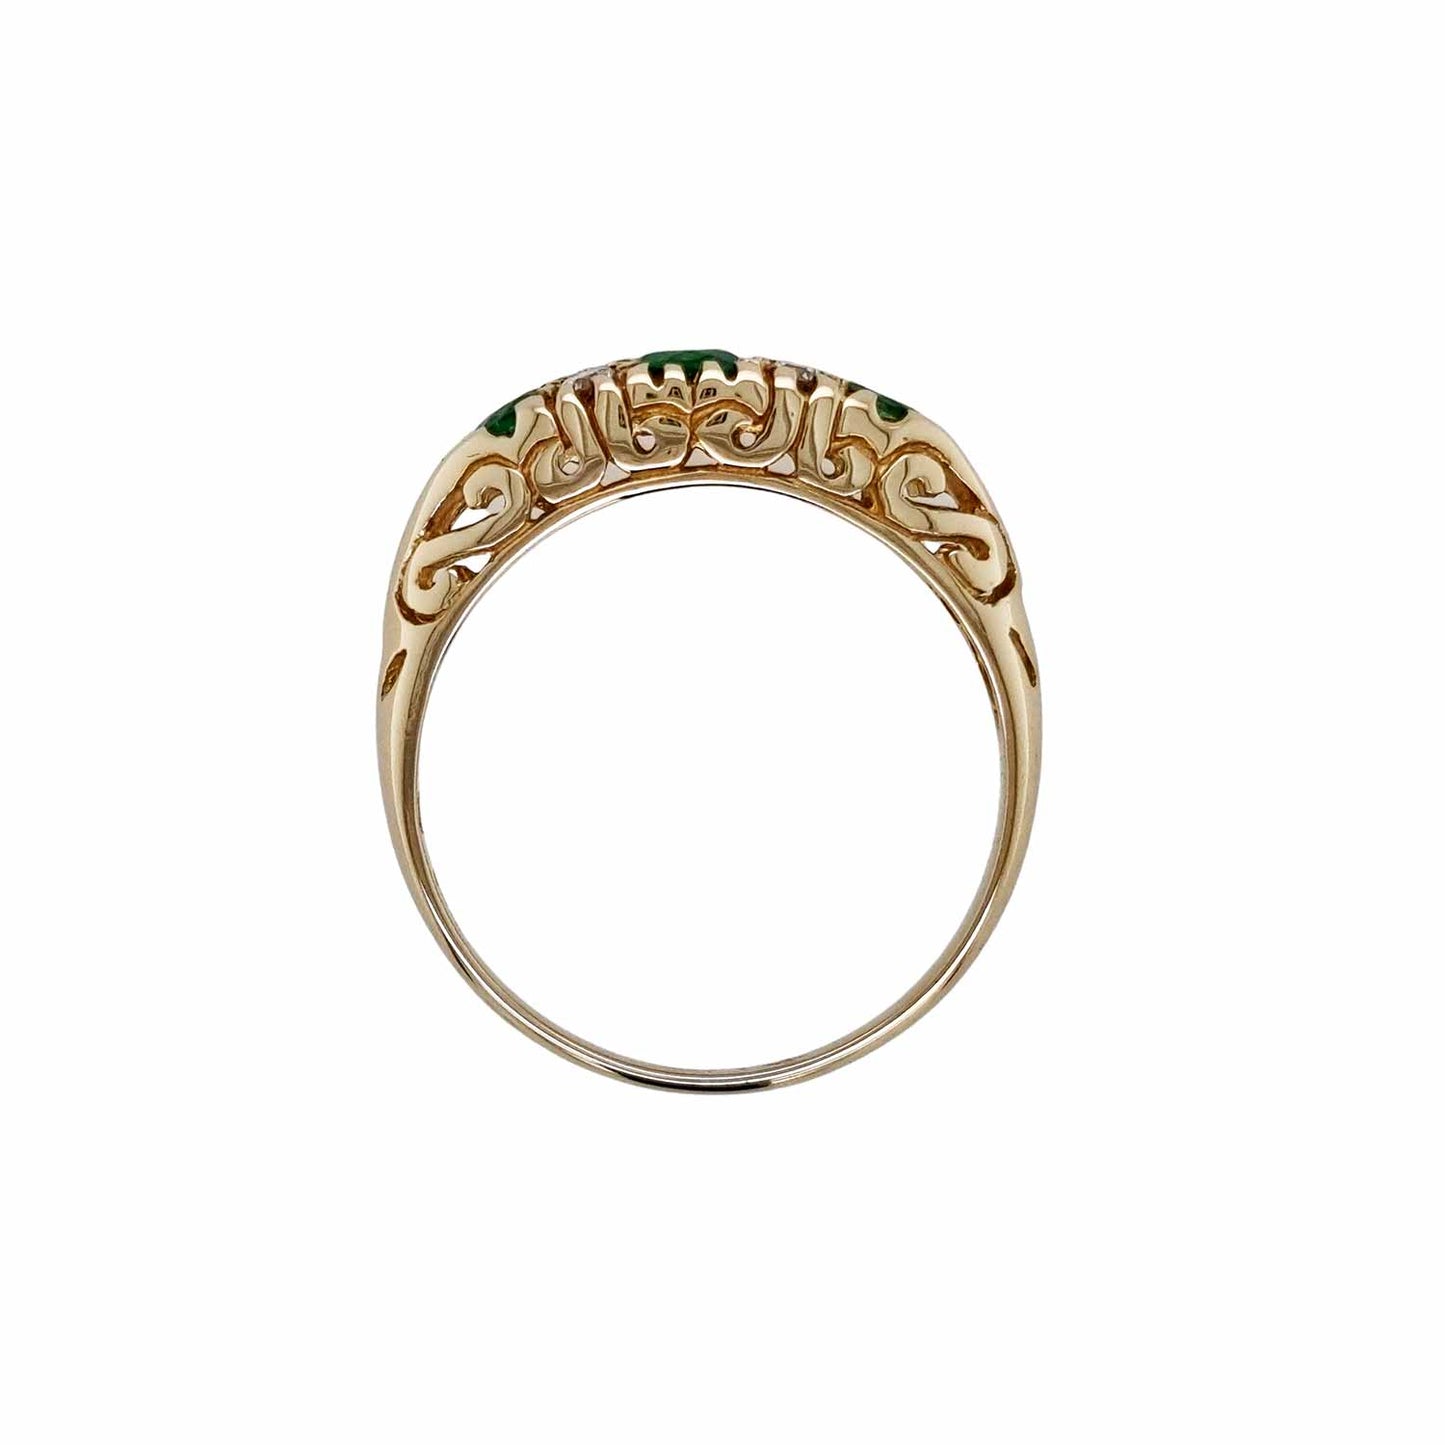 Matilda: Victorian Style Half Hoop Ring in 9ct Yellow Gold, Emerald and Diamond